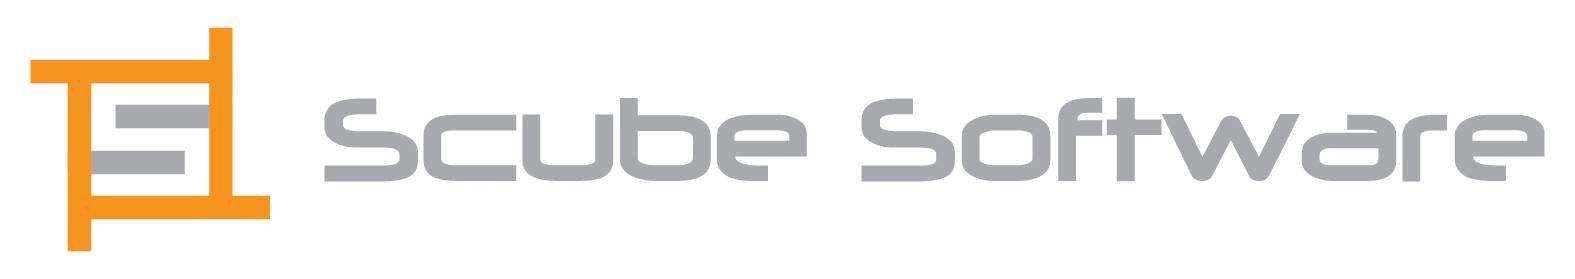 Scube Software